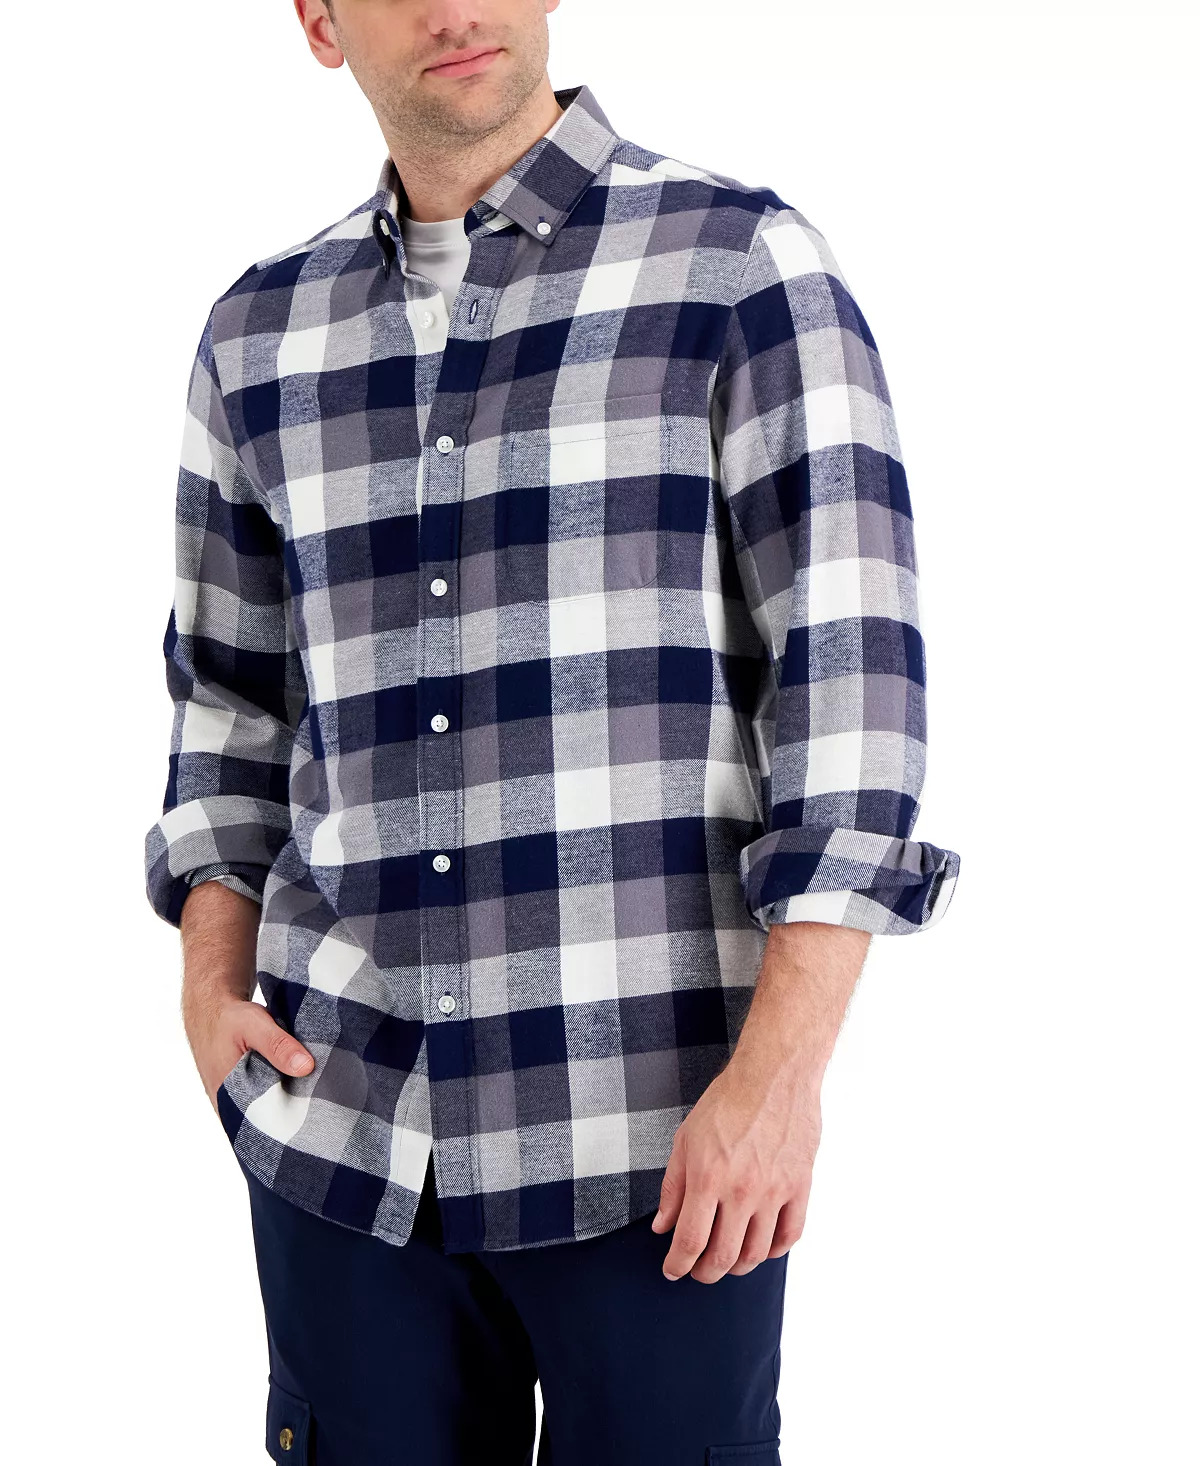 Club Room Men's Regular-Fit Plaid Flannel Shirt (Various) $9.86 + Free Store Pickup at Macy's or Free Shipping on $25+